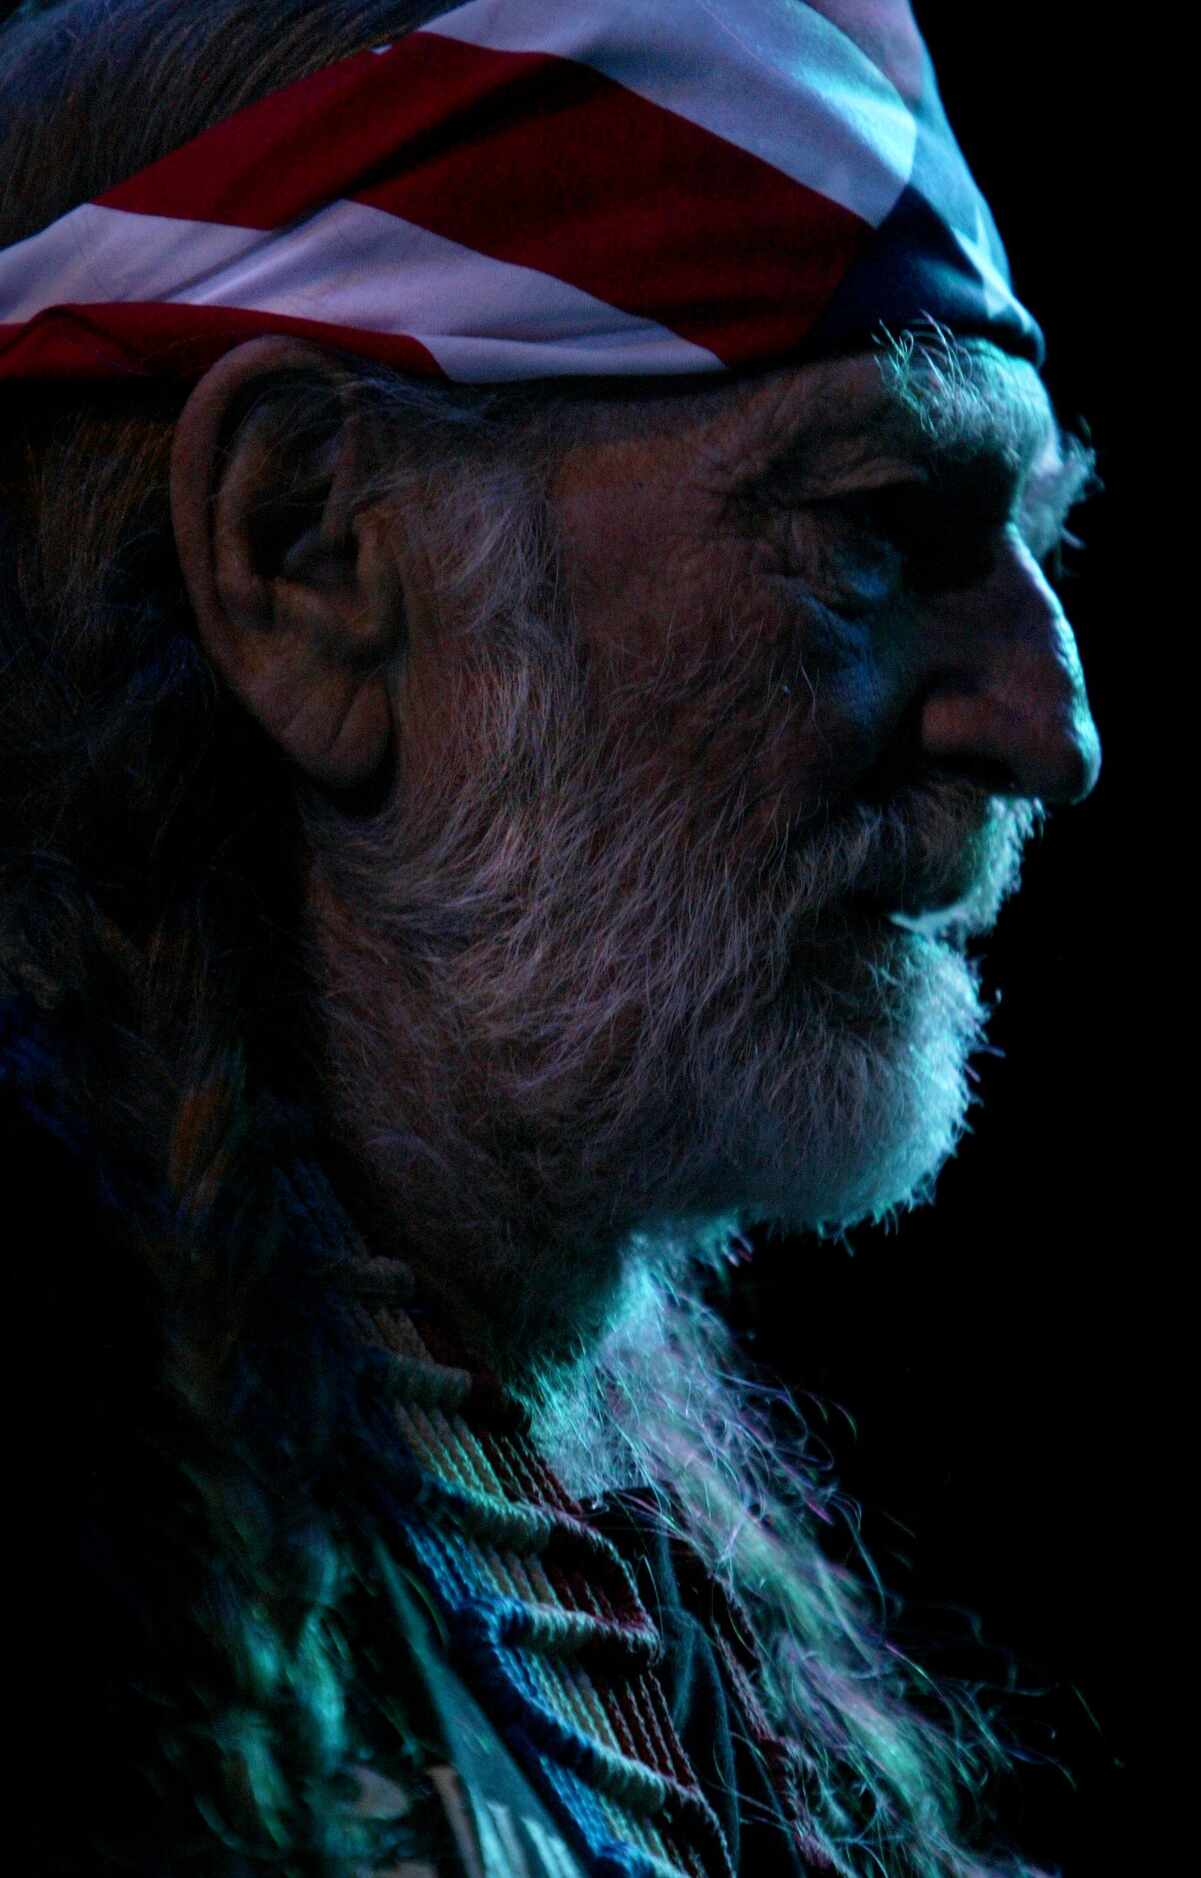 2003 - Willie Nelson performs at Lone Star Park, in Grand Prairie, Texas.